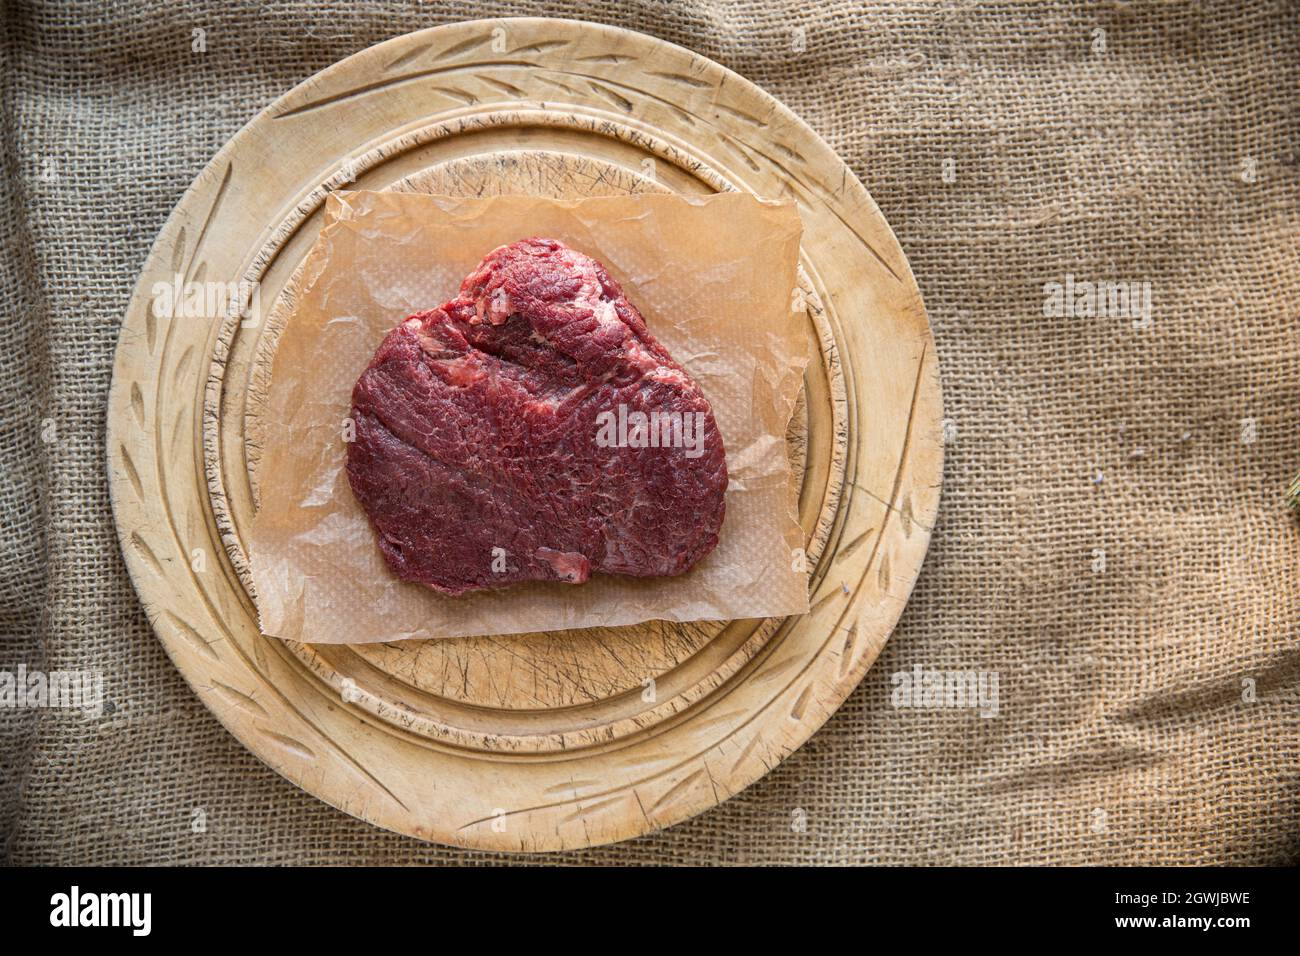 A raw, uncooked ox cheek bought from a supermarket in the UK. Ox cheeks have gained in popularity as an alternative cut of meat. England UK GB Stock Photo